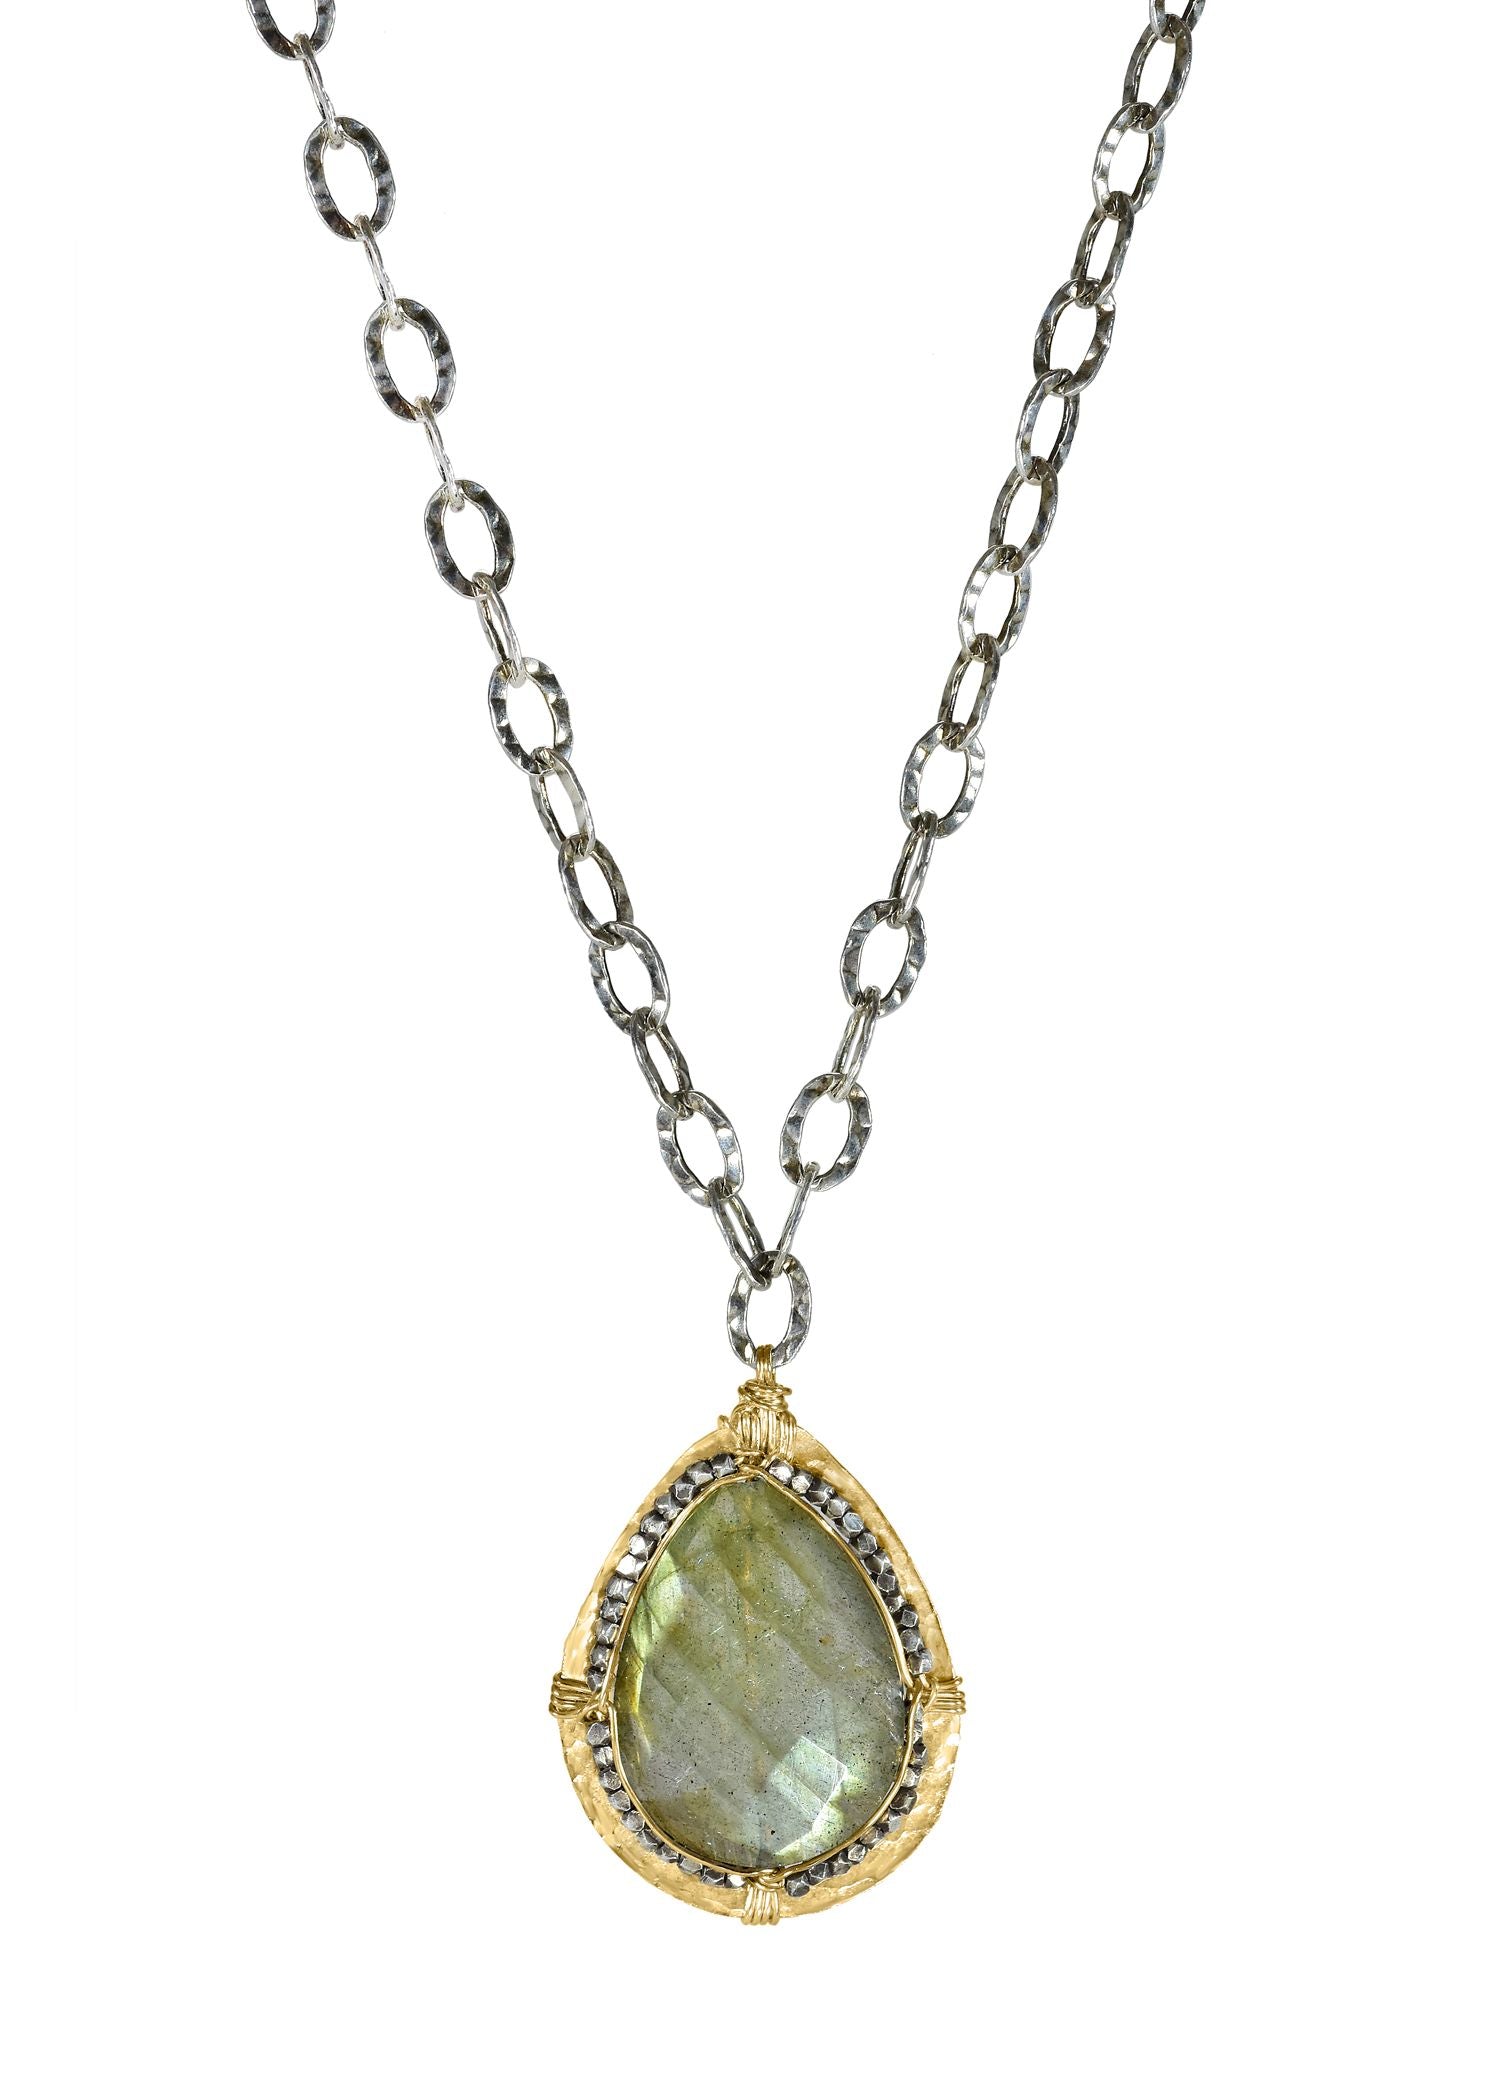 Labradorite 14k gold fill Sterling silver Necklace measures 17” in length Pendant measures 1-1/8” in length and 13/16” in width Handmade in our Los Angeles studio